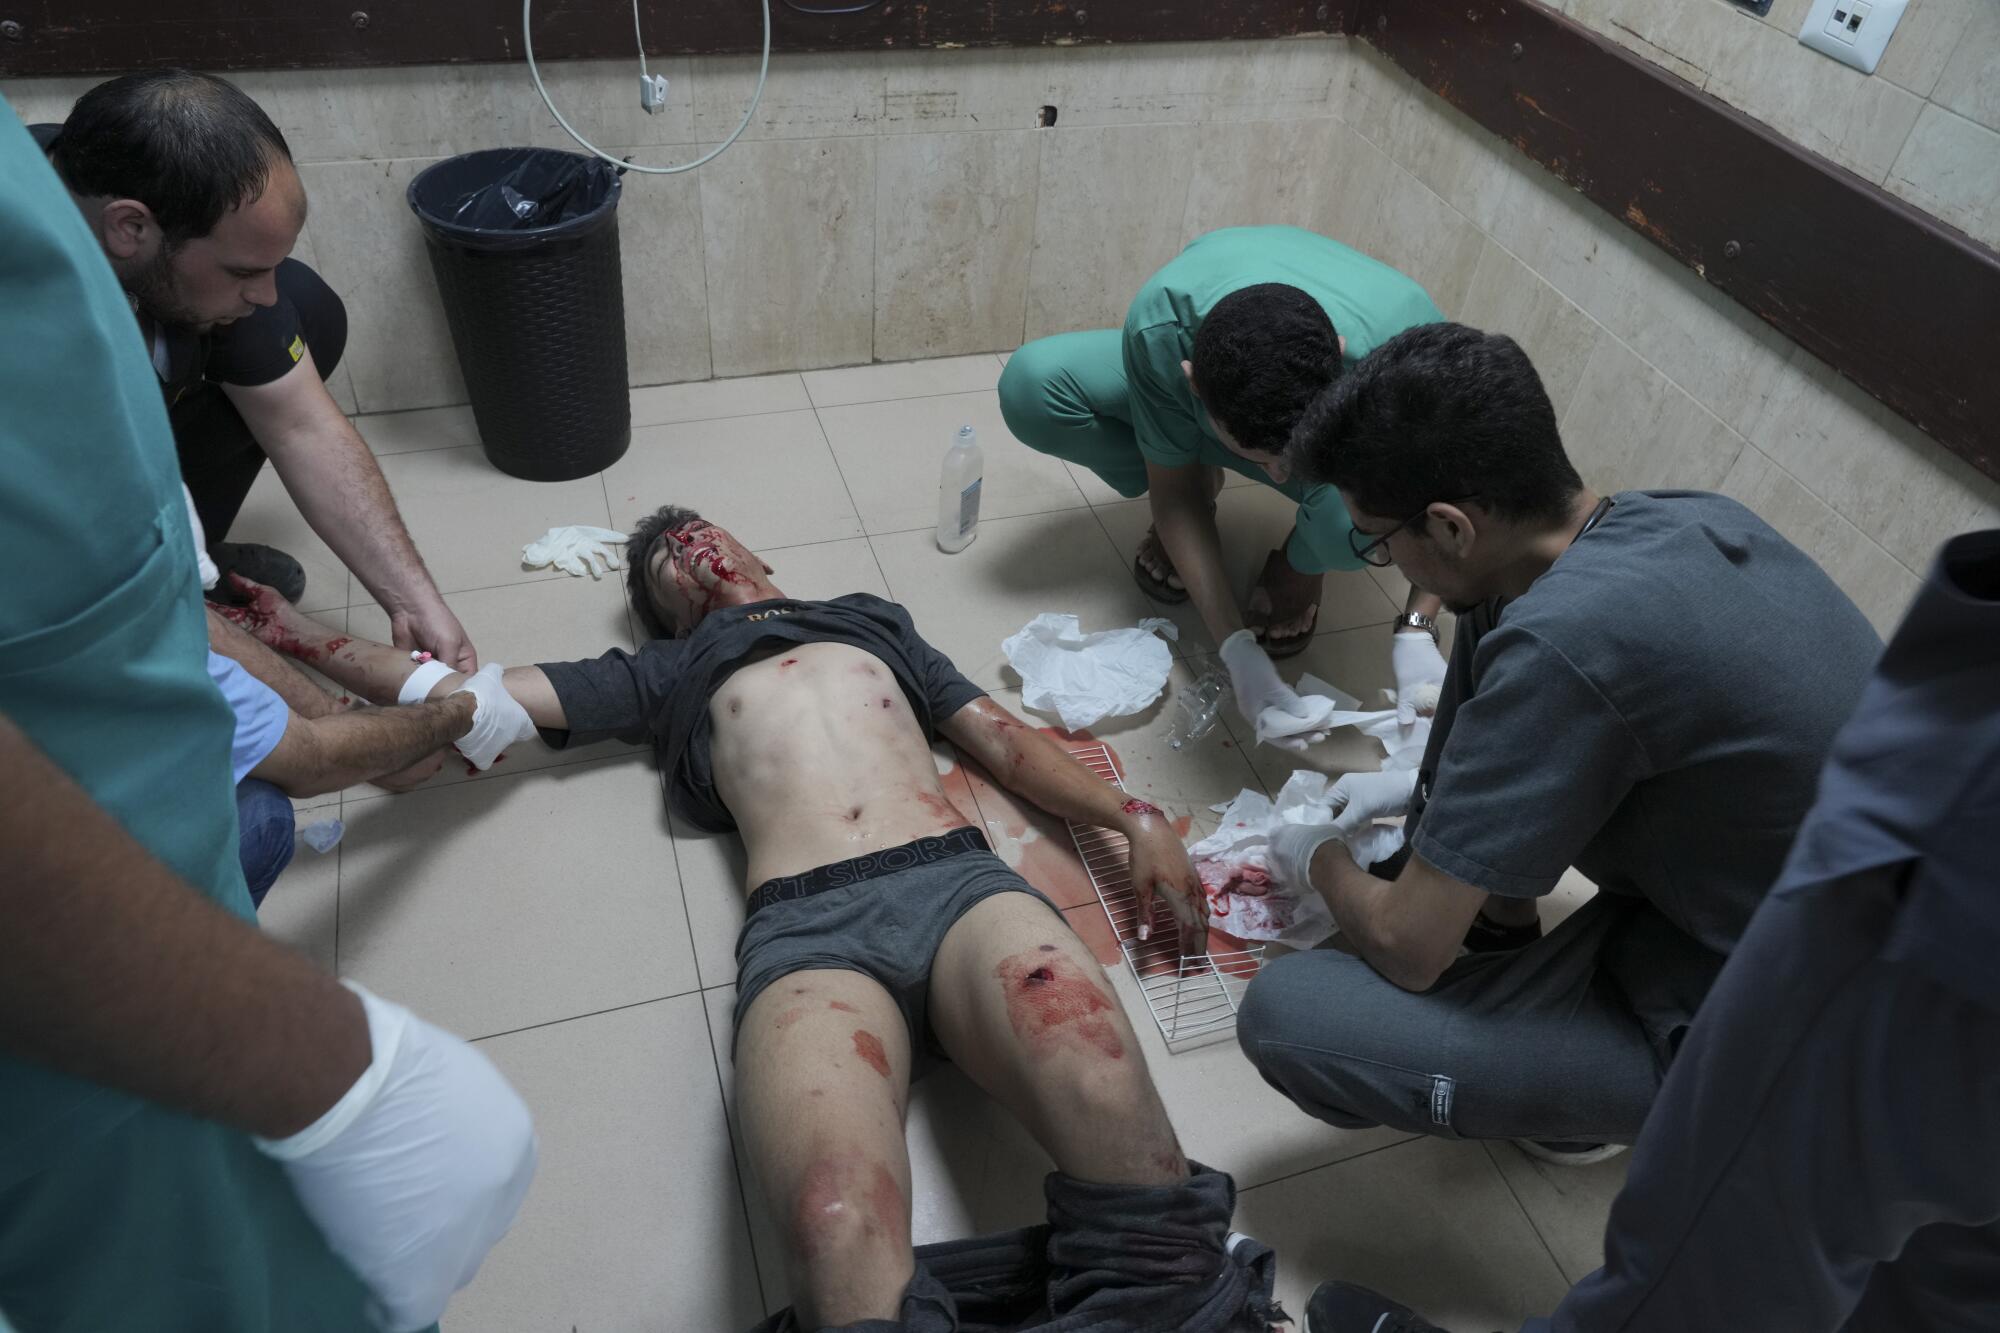 Palestinian wounded in Israeli bombardment being treated in a Gaza hospital